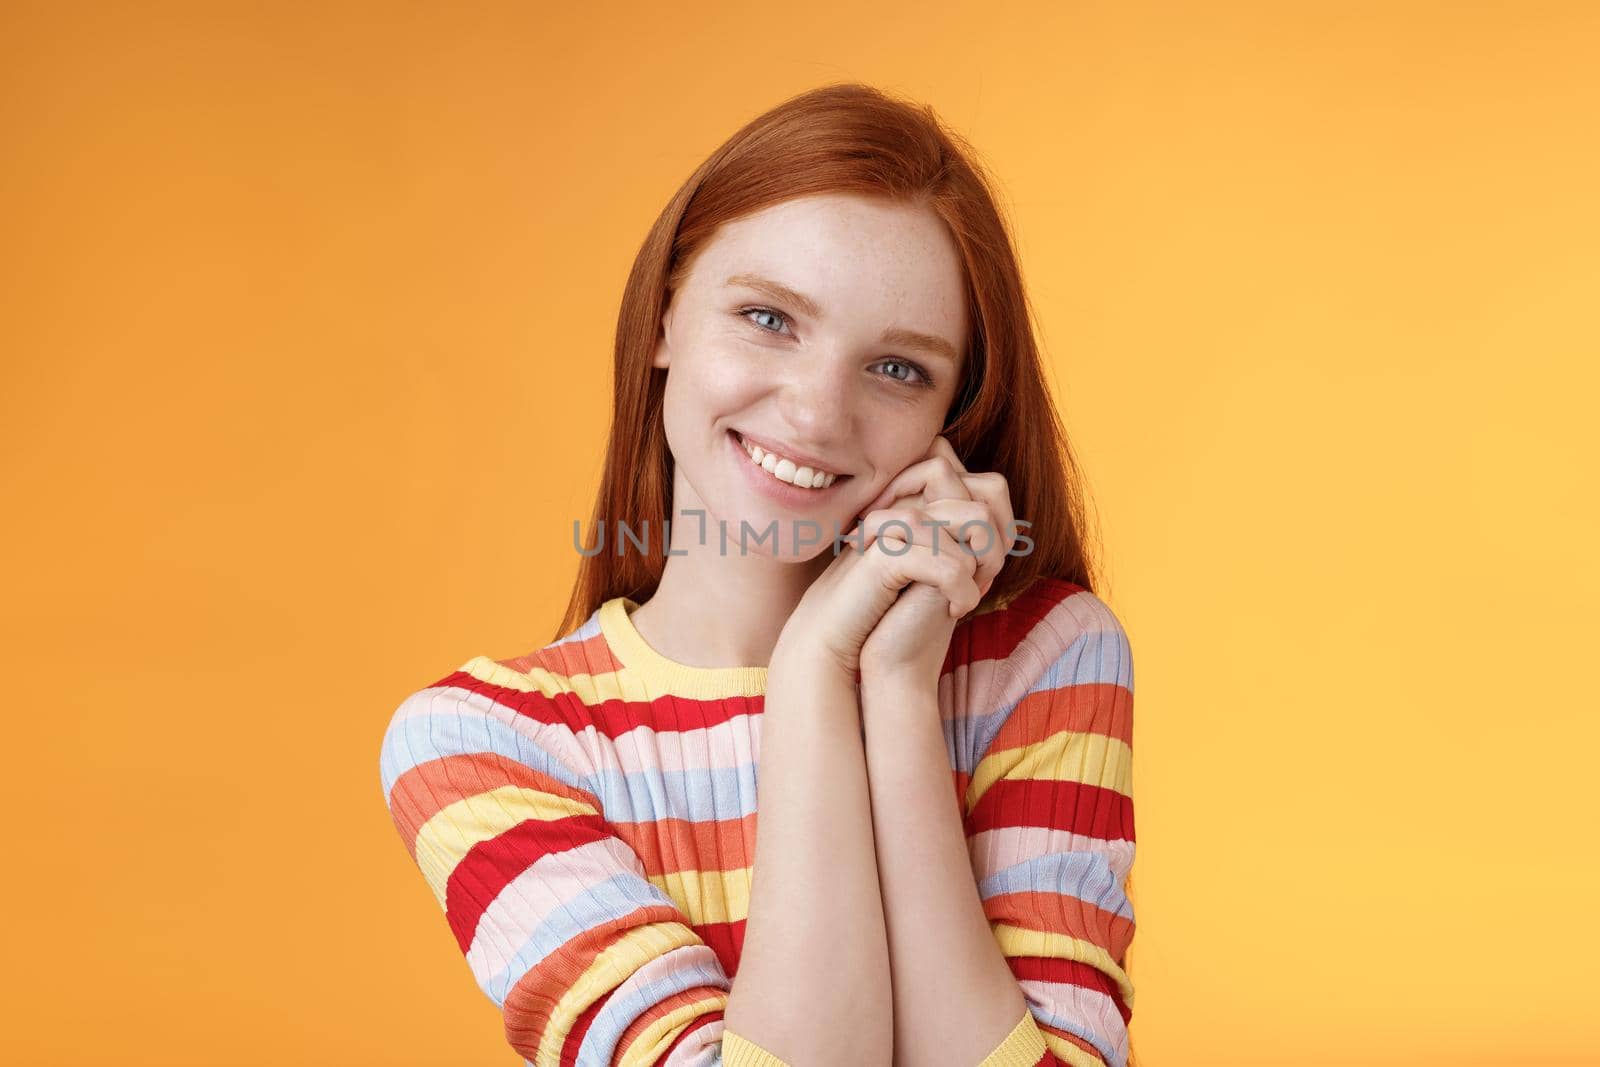 Romantic tender sensual attractive smiling redhead girlfriend melting heart feel warmth delighted lean palms grinning happily sweet gentle gift standing pleased orange background rejoicing thankful.